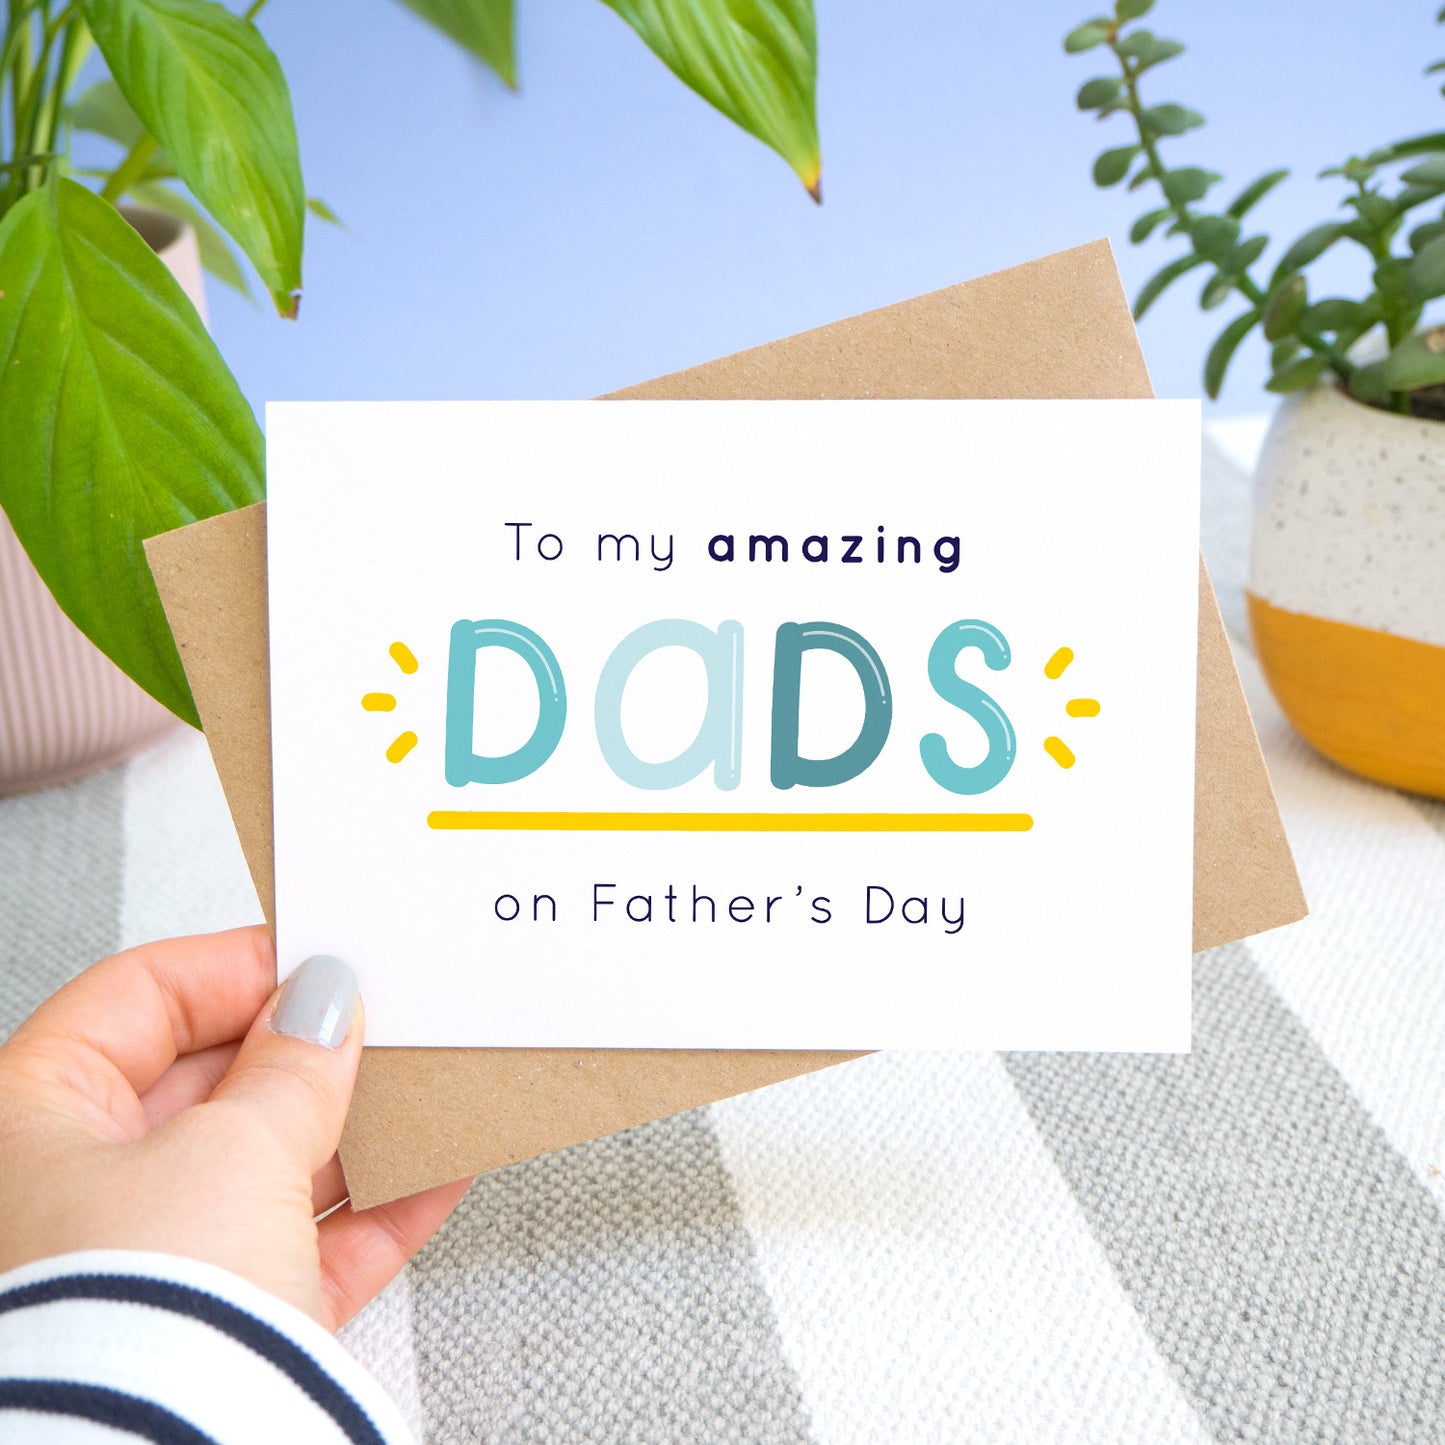 An amazing dads card being held over a stripy carpet and a blue background with potted plants behind. The card shows navy and varying tones of blue text with a yellow underline and flicks. The card reads: "to my amazing dads on Father's day"